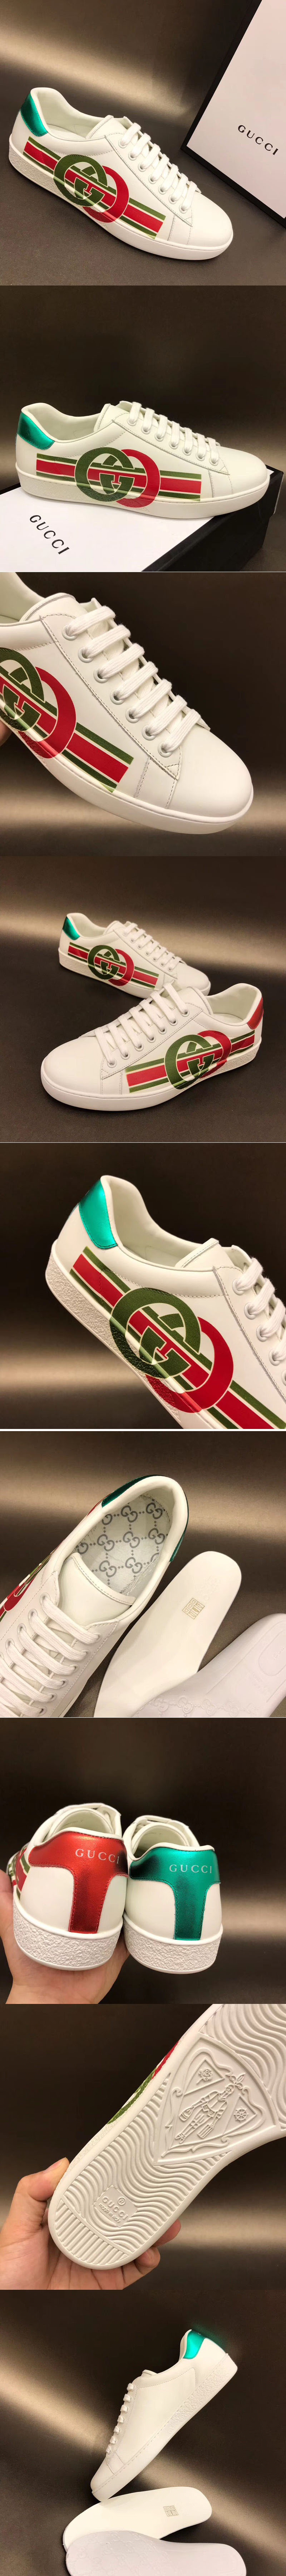 Replica Gucci 576136 Ace sneaker with Interlocking G Shoes Women and Mens White Leather